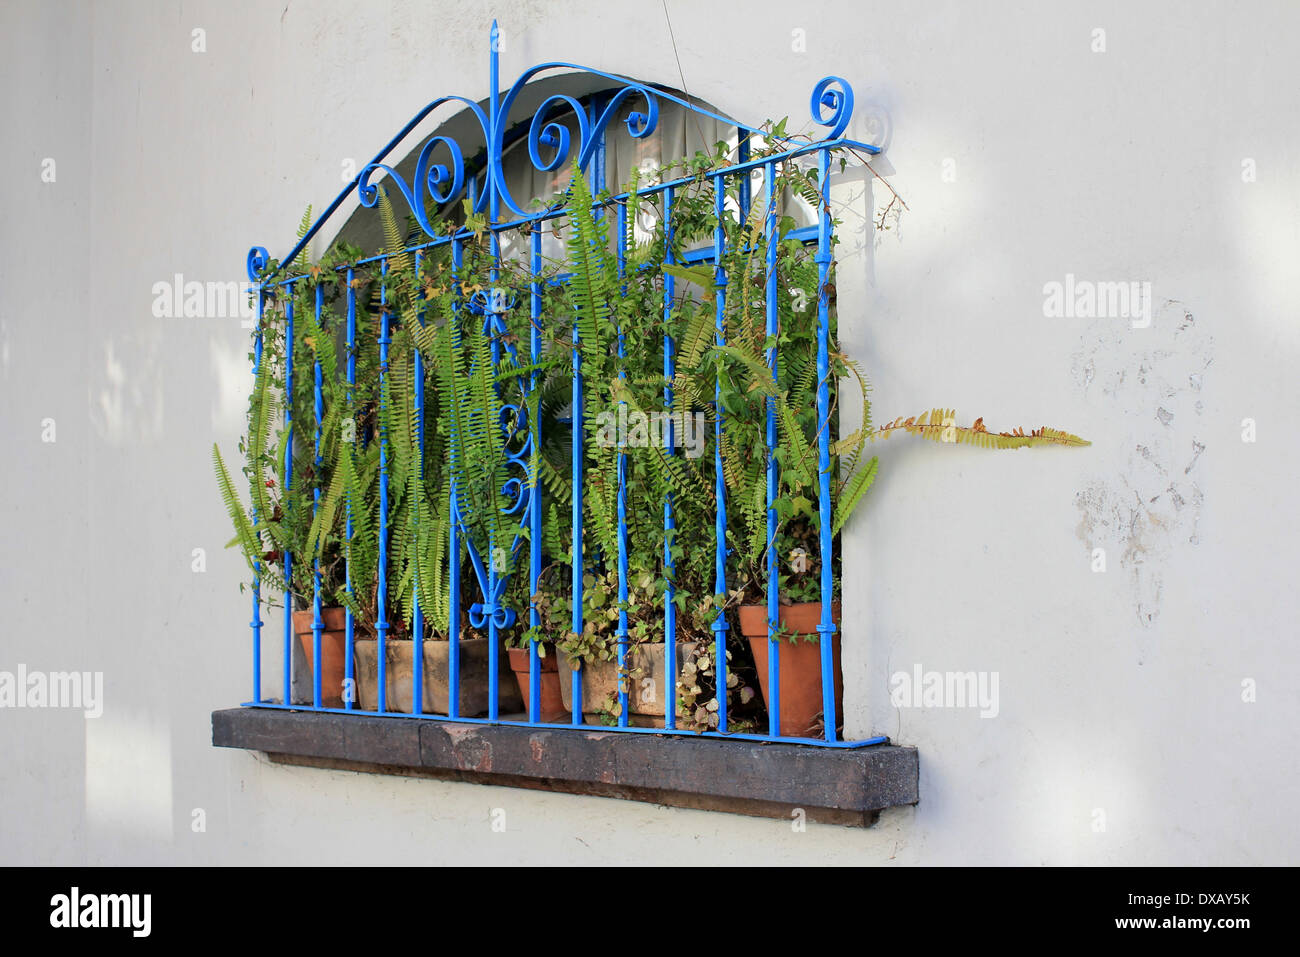 Ferns behind blue railings in a window in the Colonia Condesa, Mexico City, Mexico Stock Photo